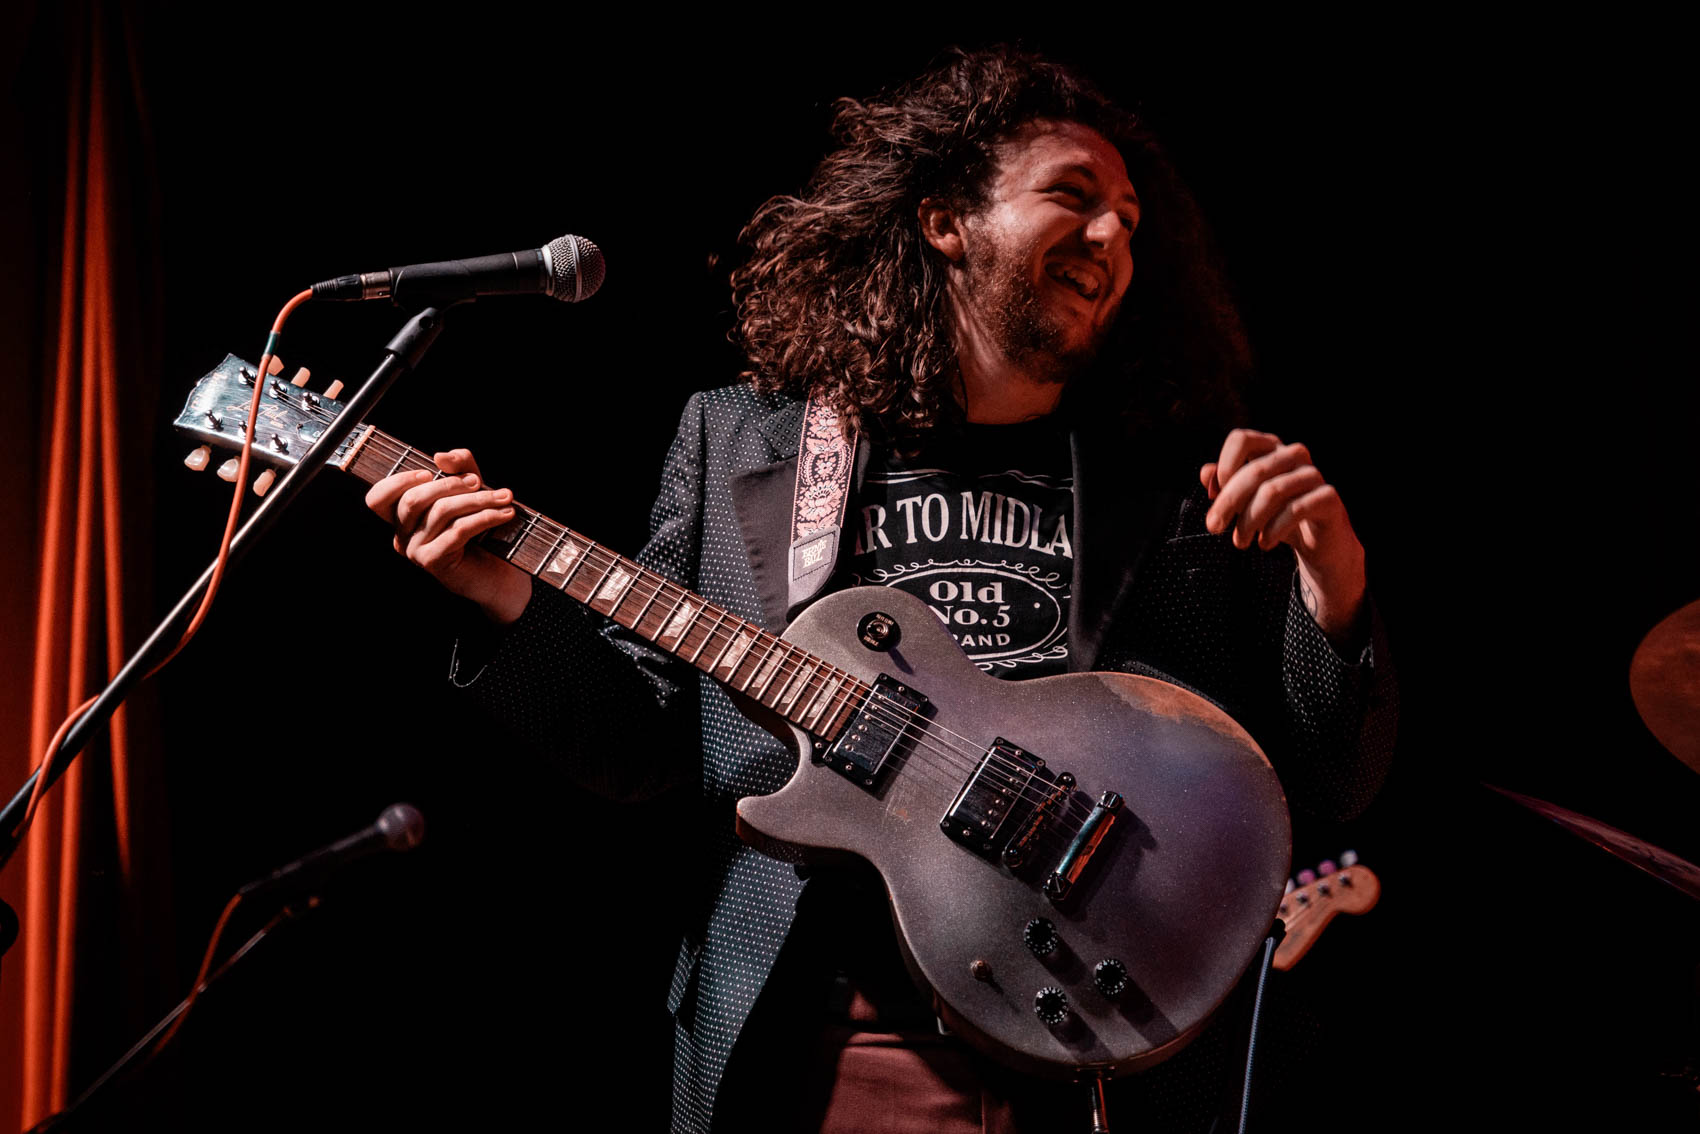 A musician playing guitar and smiling on stage